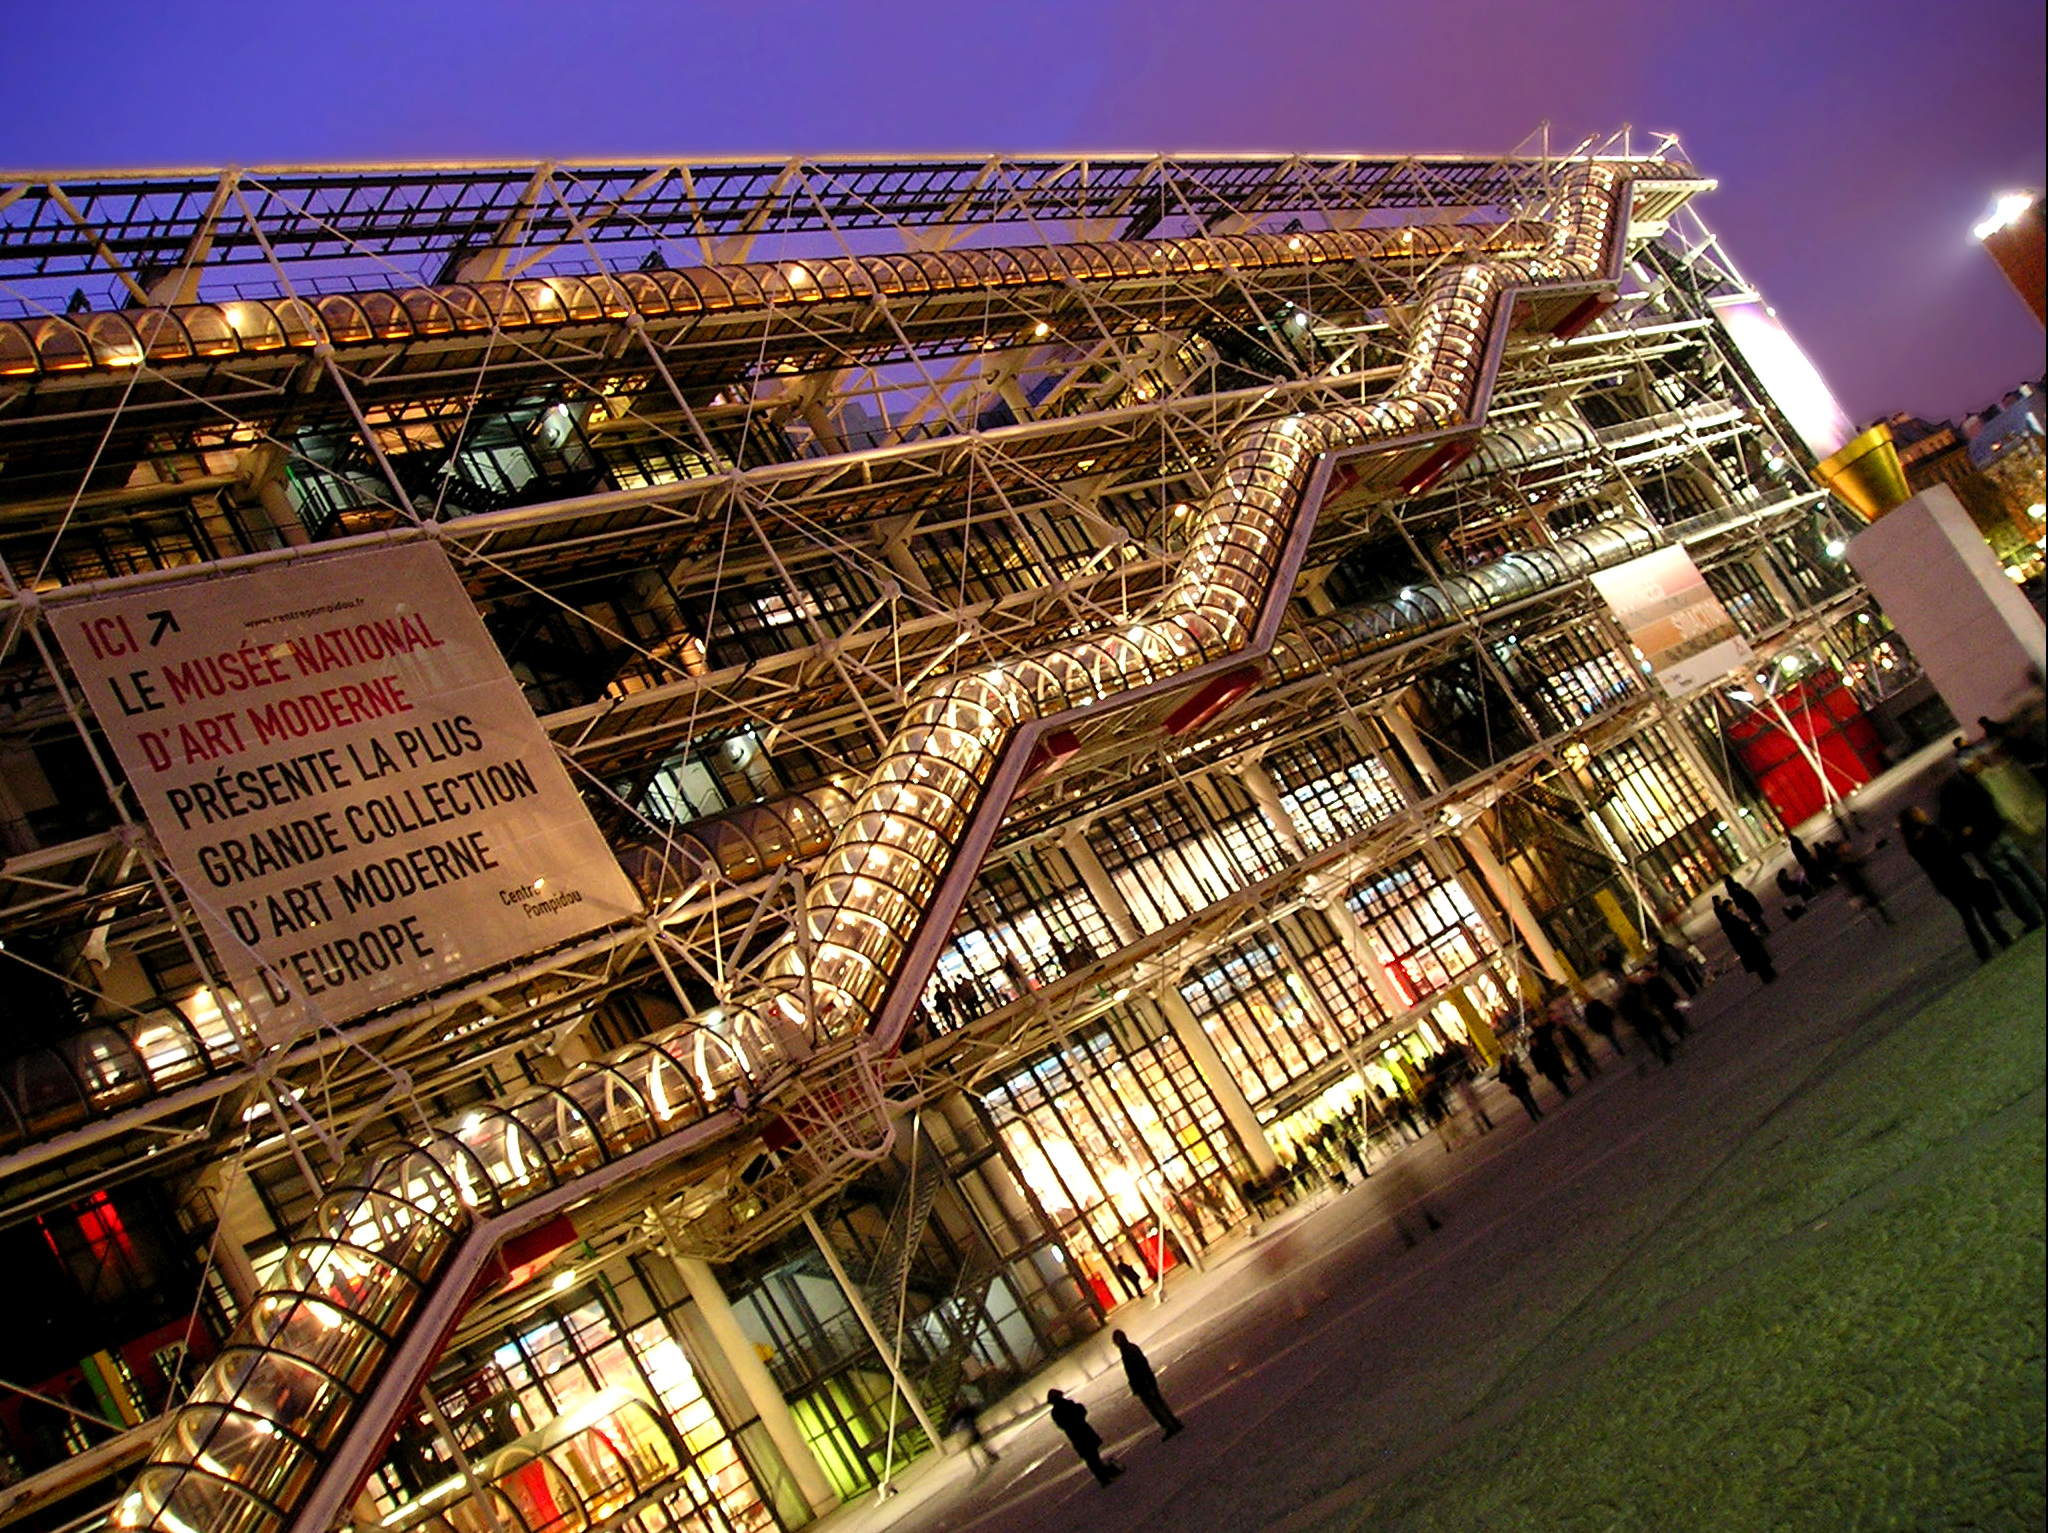 Centre Pompidou by The Wandering Brit